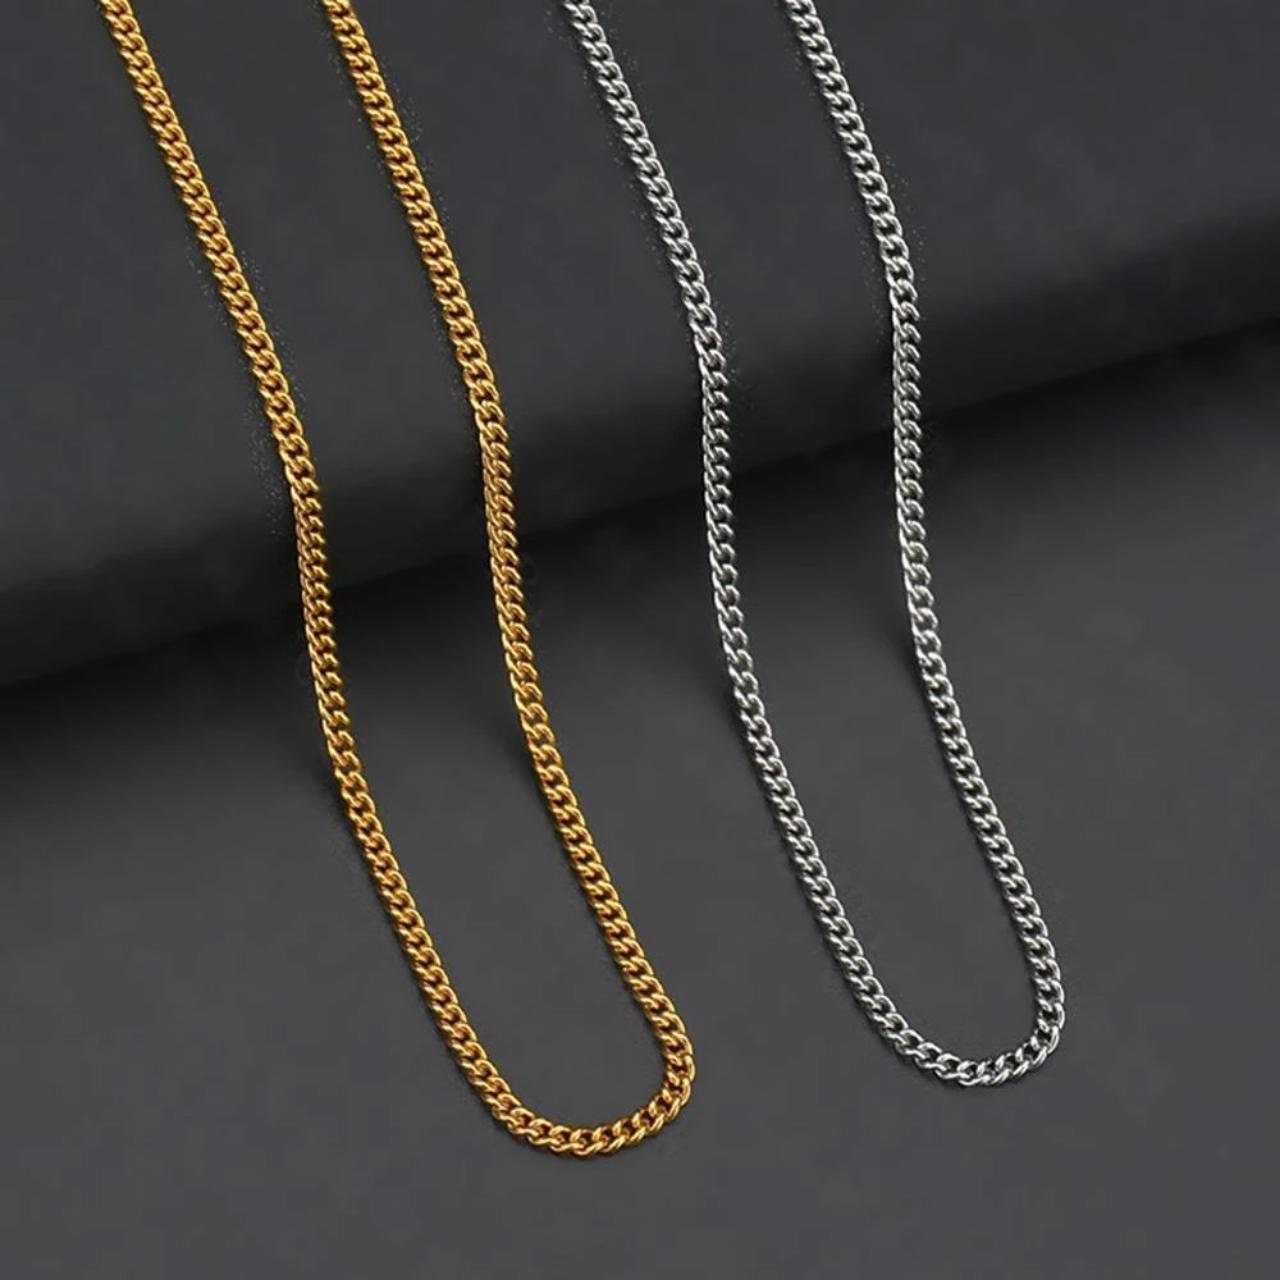 CRW Minimalistic Mountain Necklace with 1.8mm curb link chain in gold - Camp Necklace for Women - Necklace for Men - Necklace with Pendant